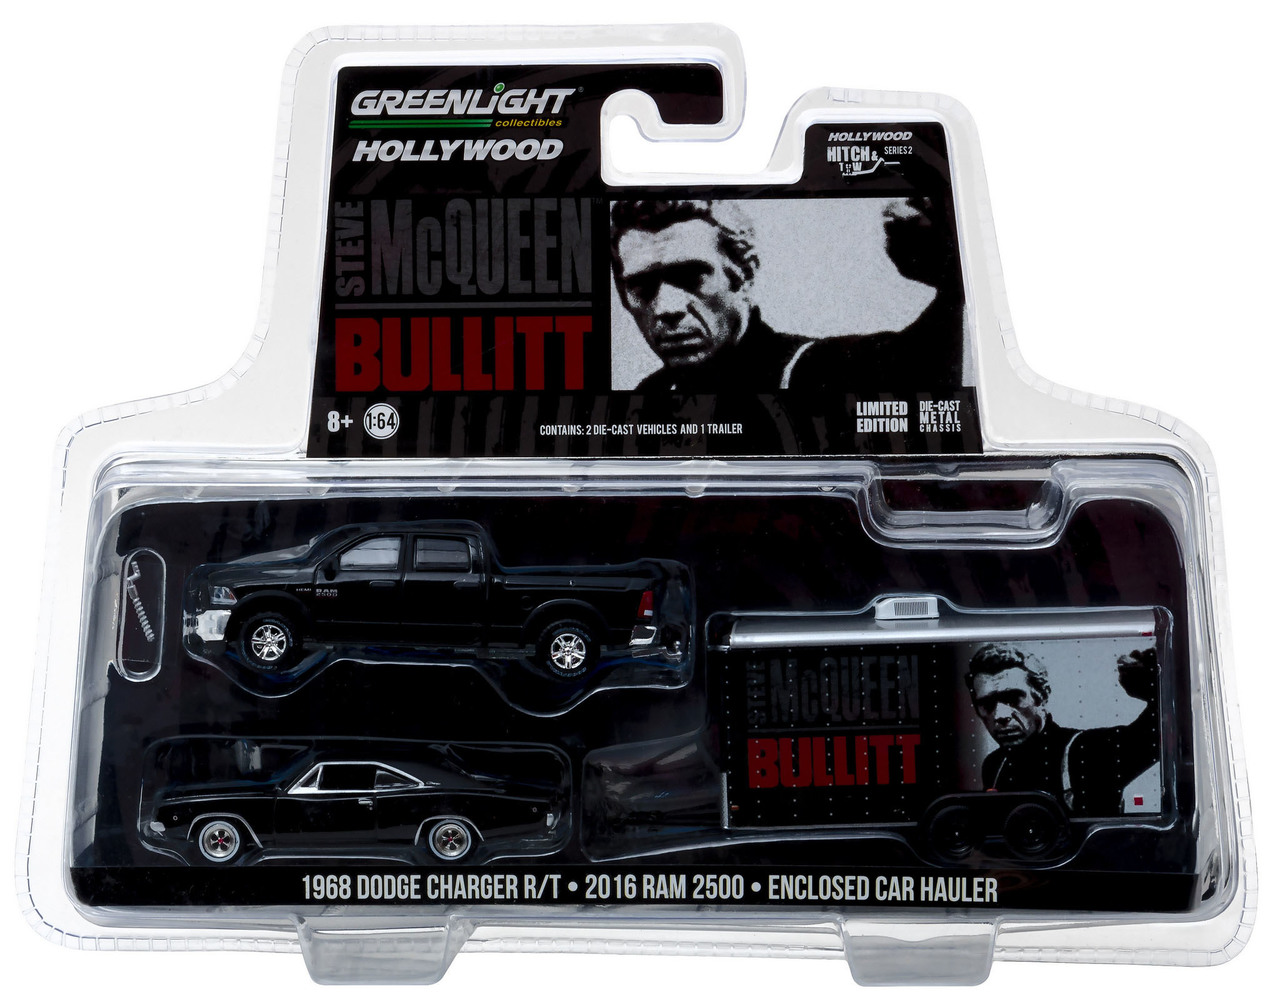 2016 Dodge Ram 2500 And 1968 Dodge Charger R/t Bullitt (1968) In Enclosed Car Hauler 1/64 Diecast Model Cars By Greenlight